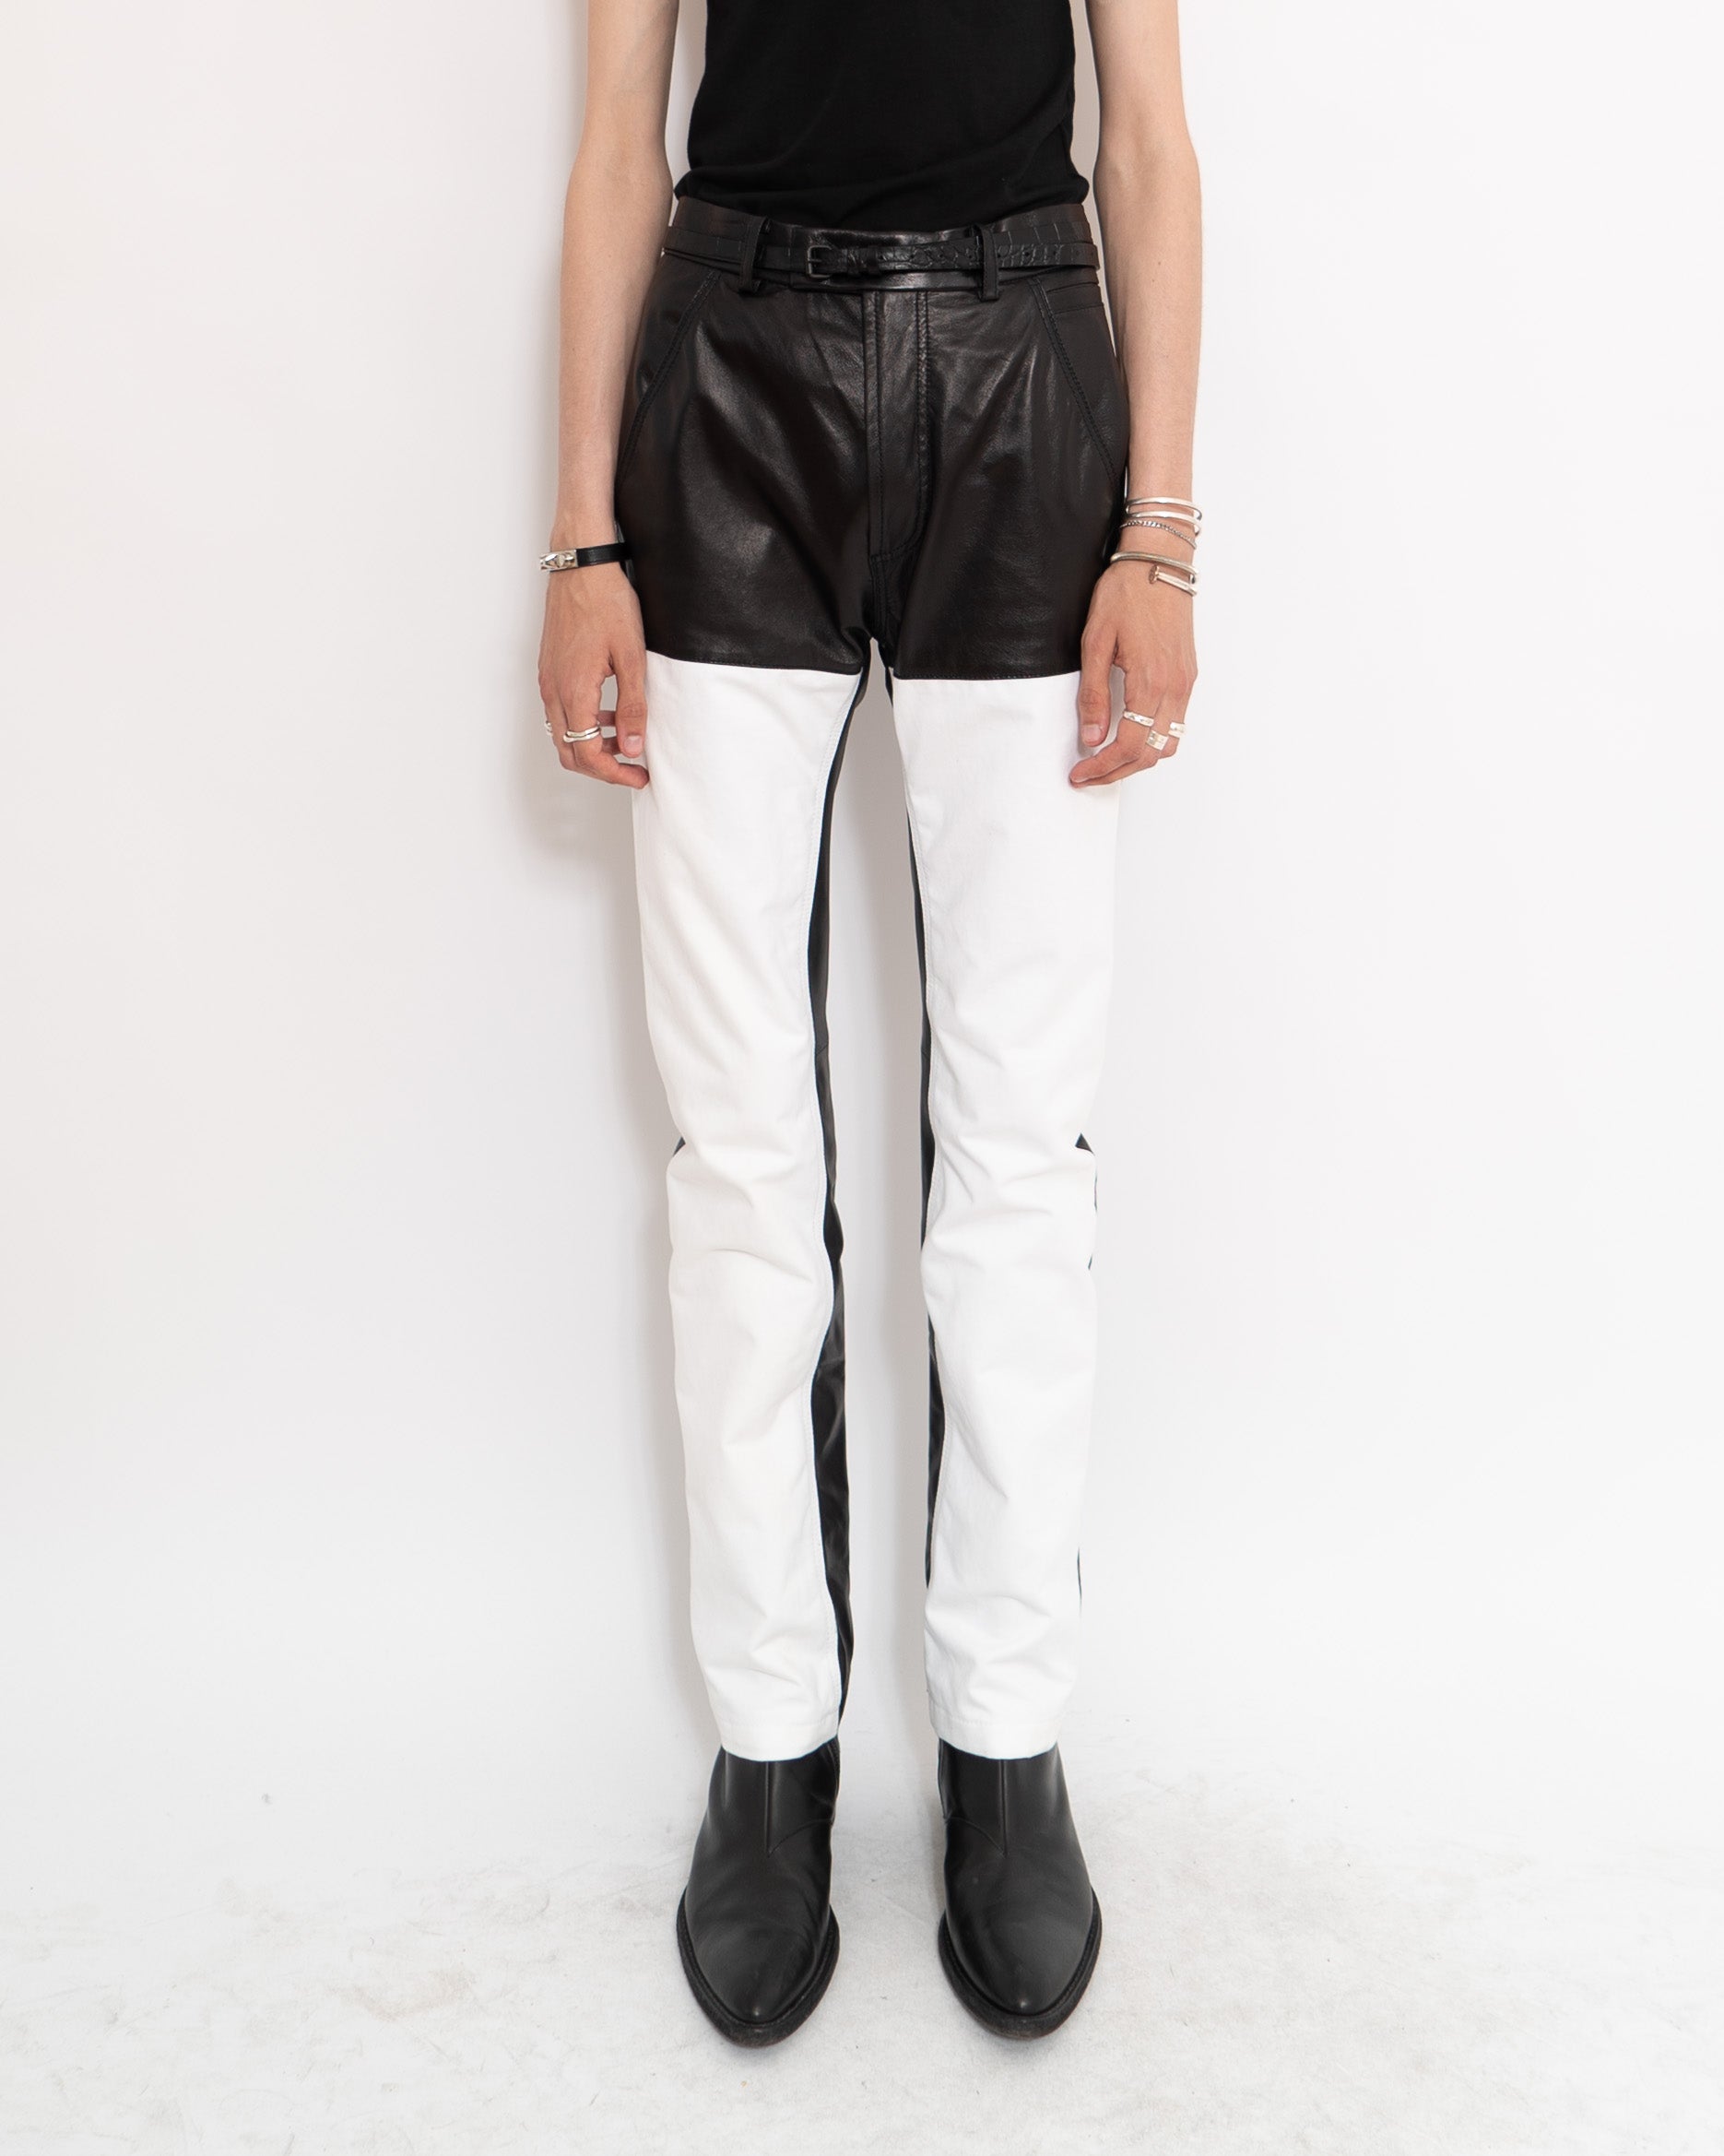 FW20 Black & White Leather Cowboy Trousers 1of1 Sample